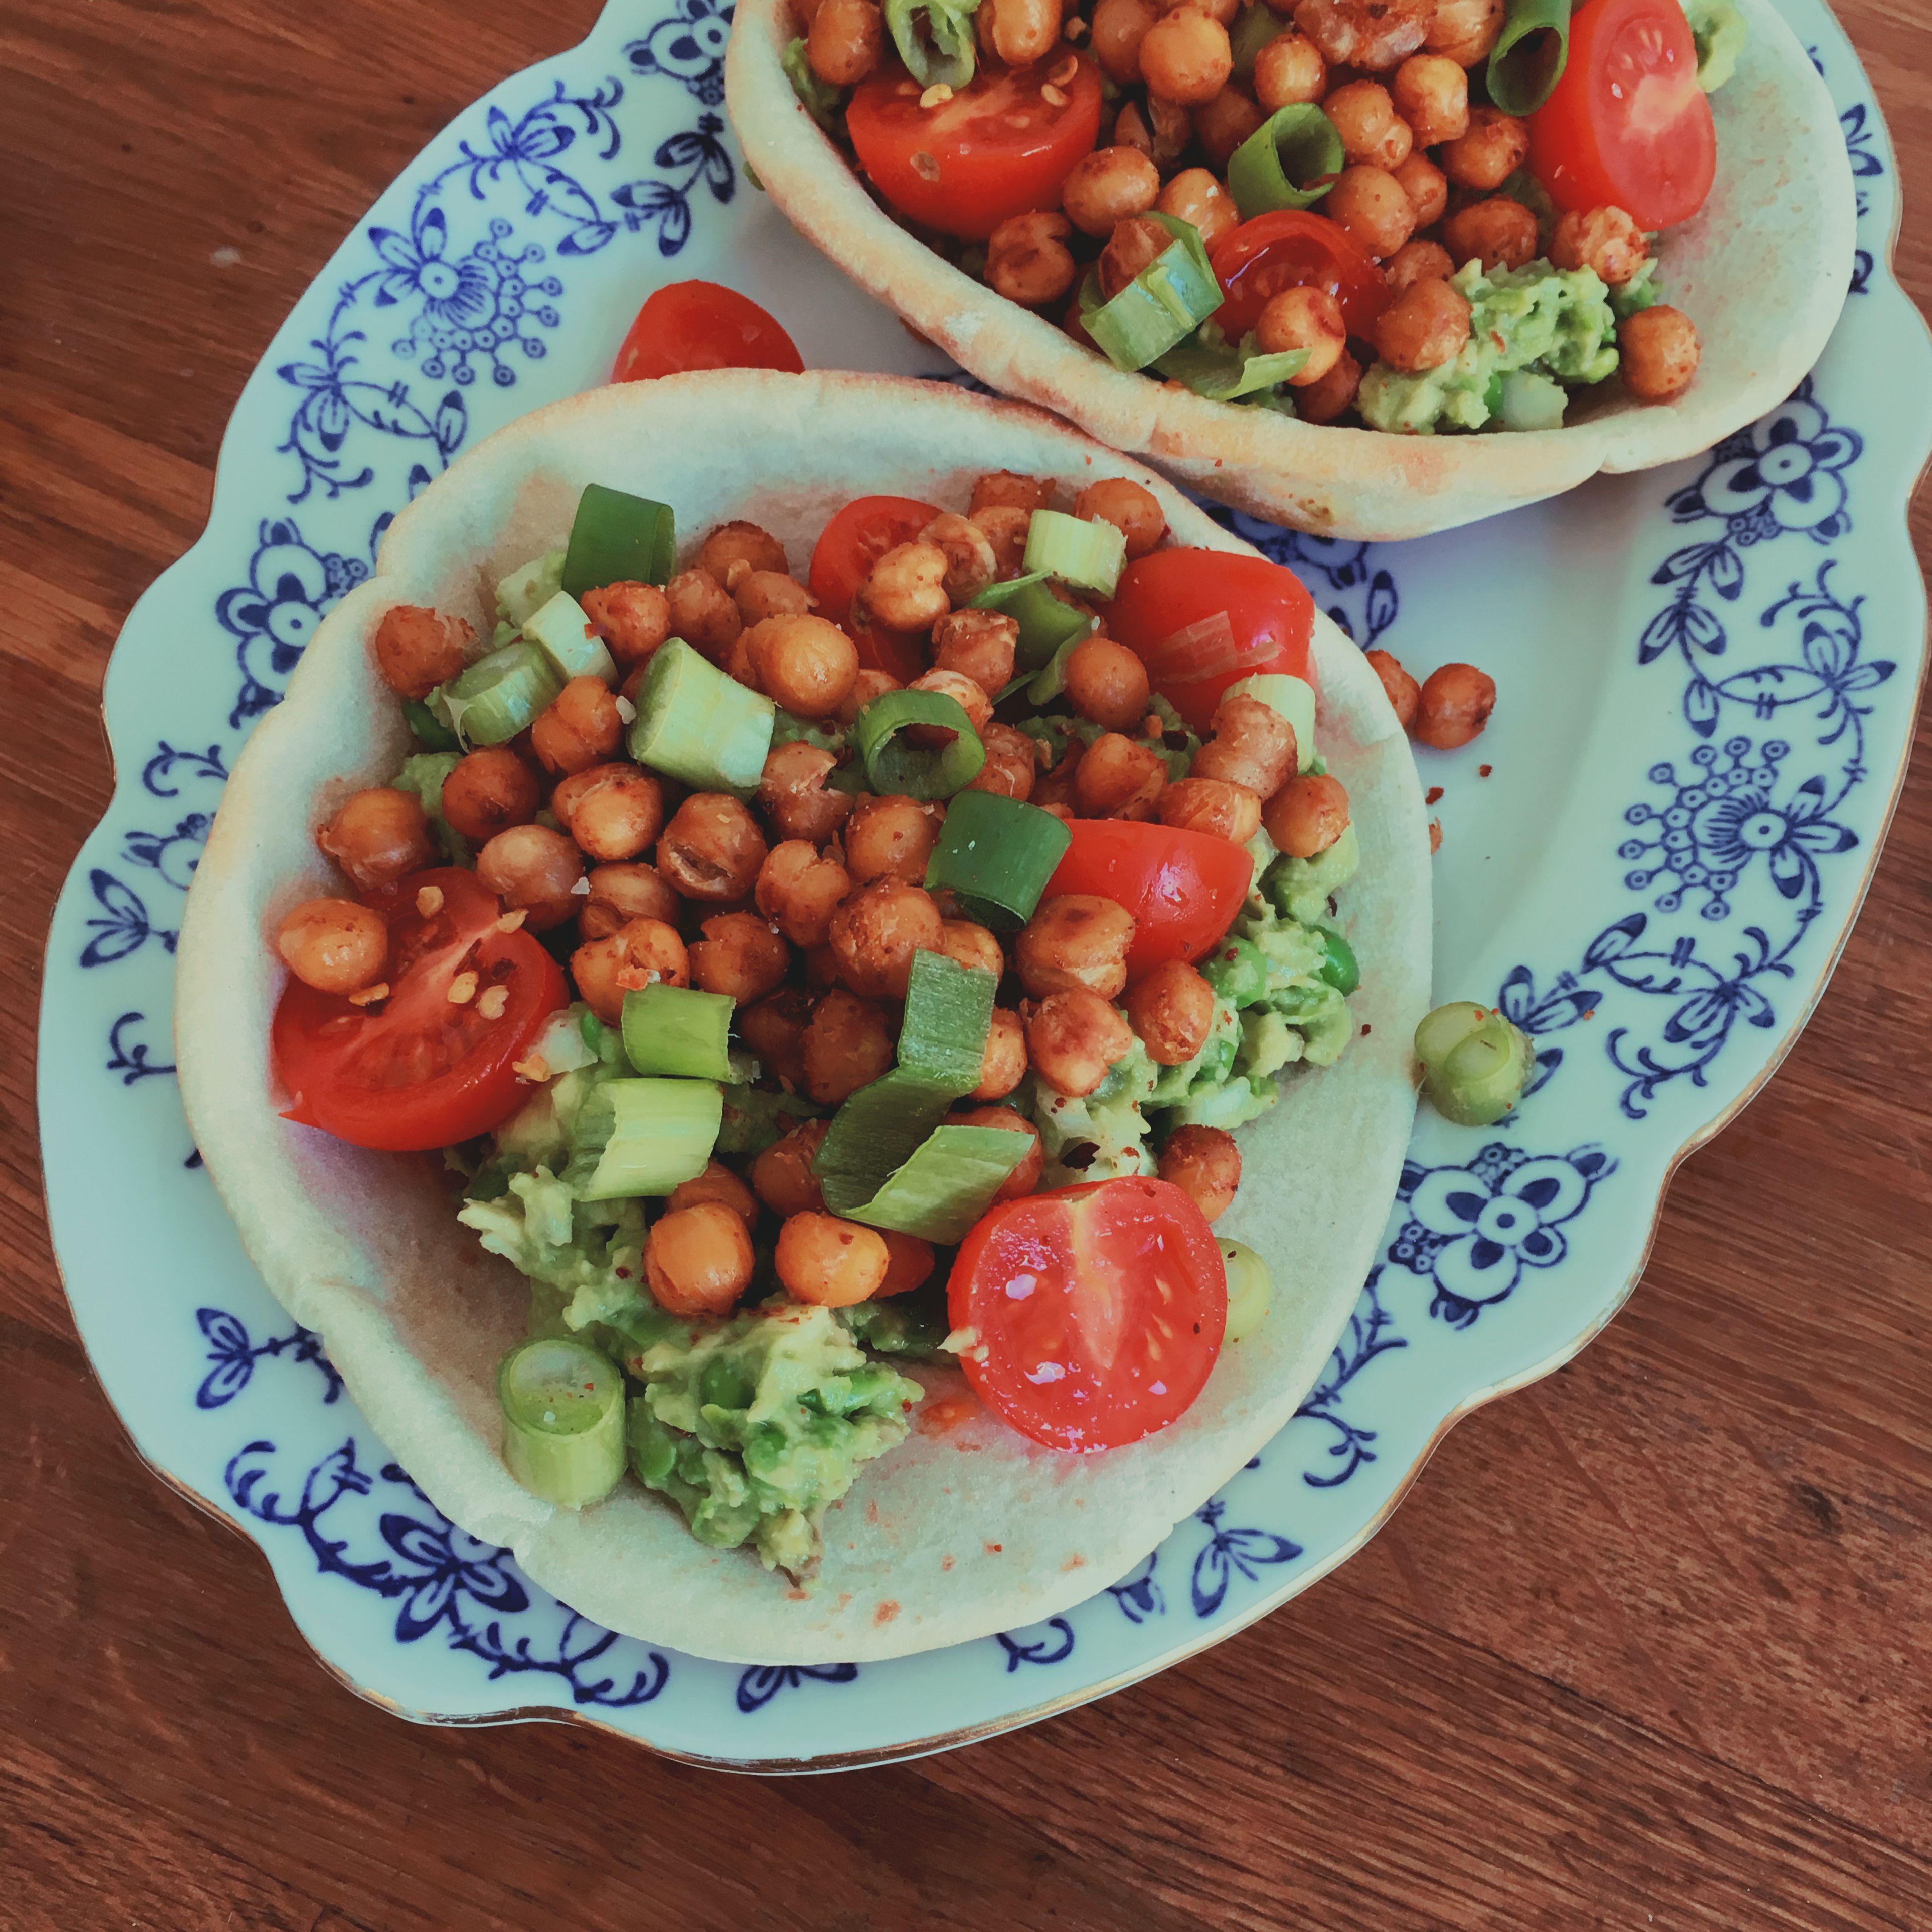 Fill pita breads with mashed green peas and avocado. Top with tomatoes, scallions, and crispy chickpeas. Enjoy!